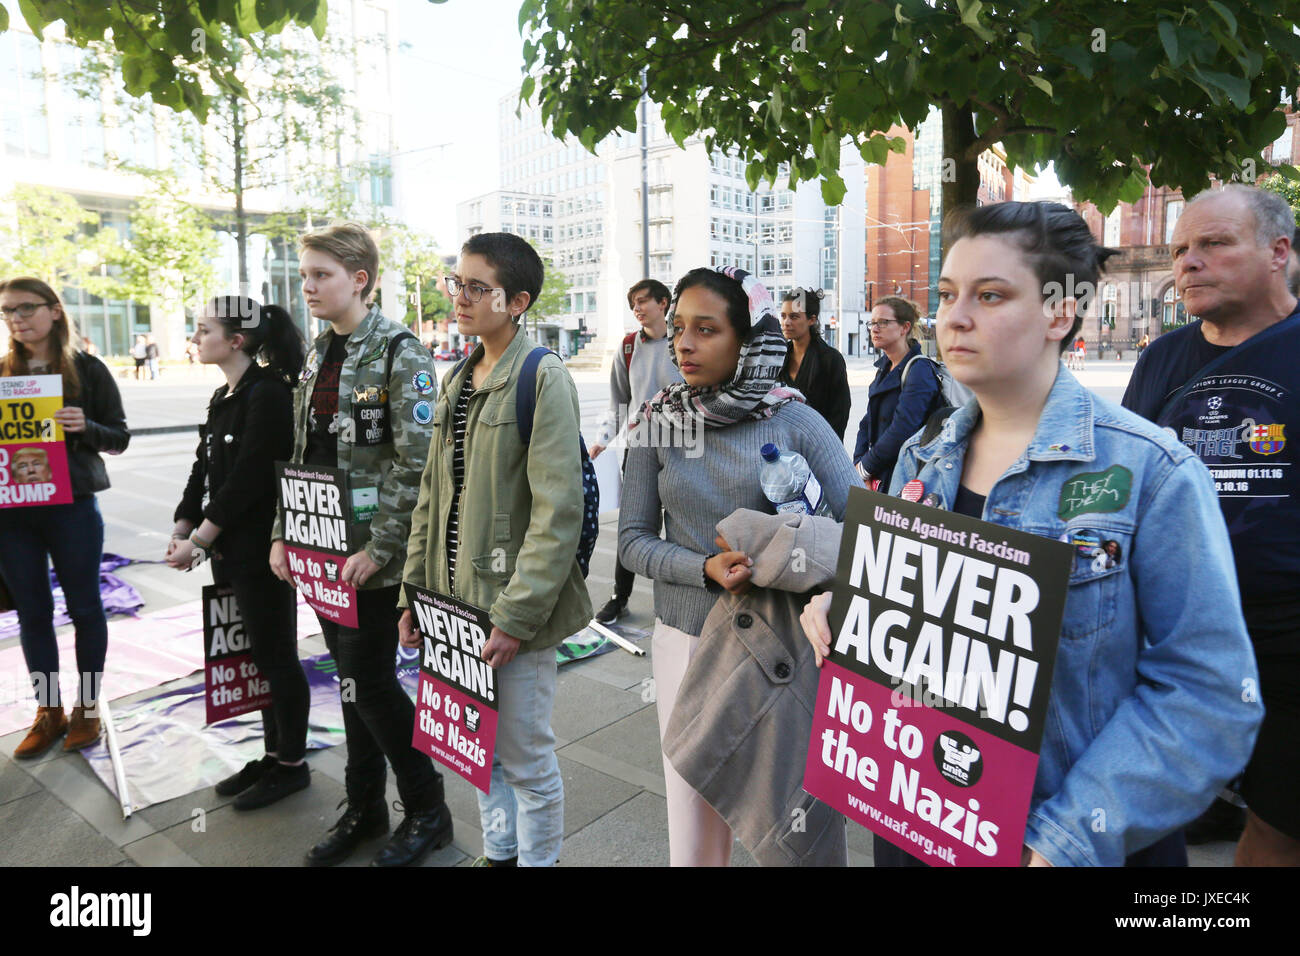 Manchester, UK. 15th Aug, 2017. Vigil for Heather Heyer who was killed in Charlottesville after a car crashed into demonstrators protesting a white supremacy rally, St Peters Square, Manchester, 15th August, 2017 Credit: Barbara Cook/Alamy Live News Stock Photo